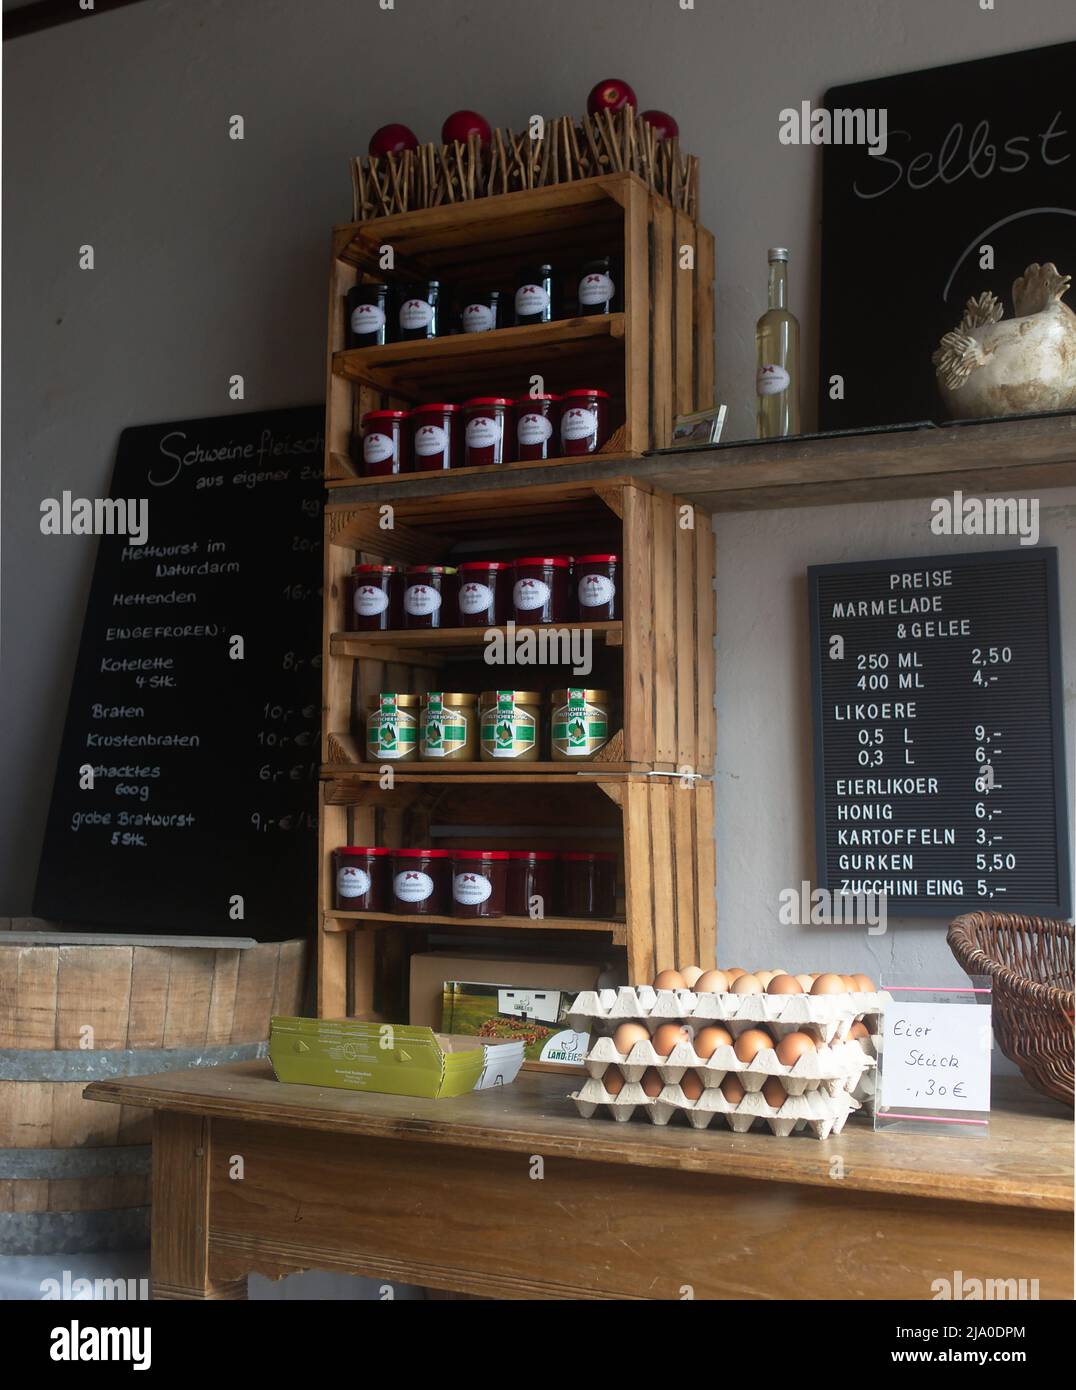 Shelf made of wooden boxes eggs in egg carton Price list Farm shop farm with lots of jam jars Stock Photo